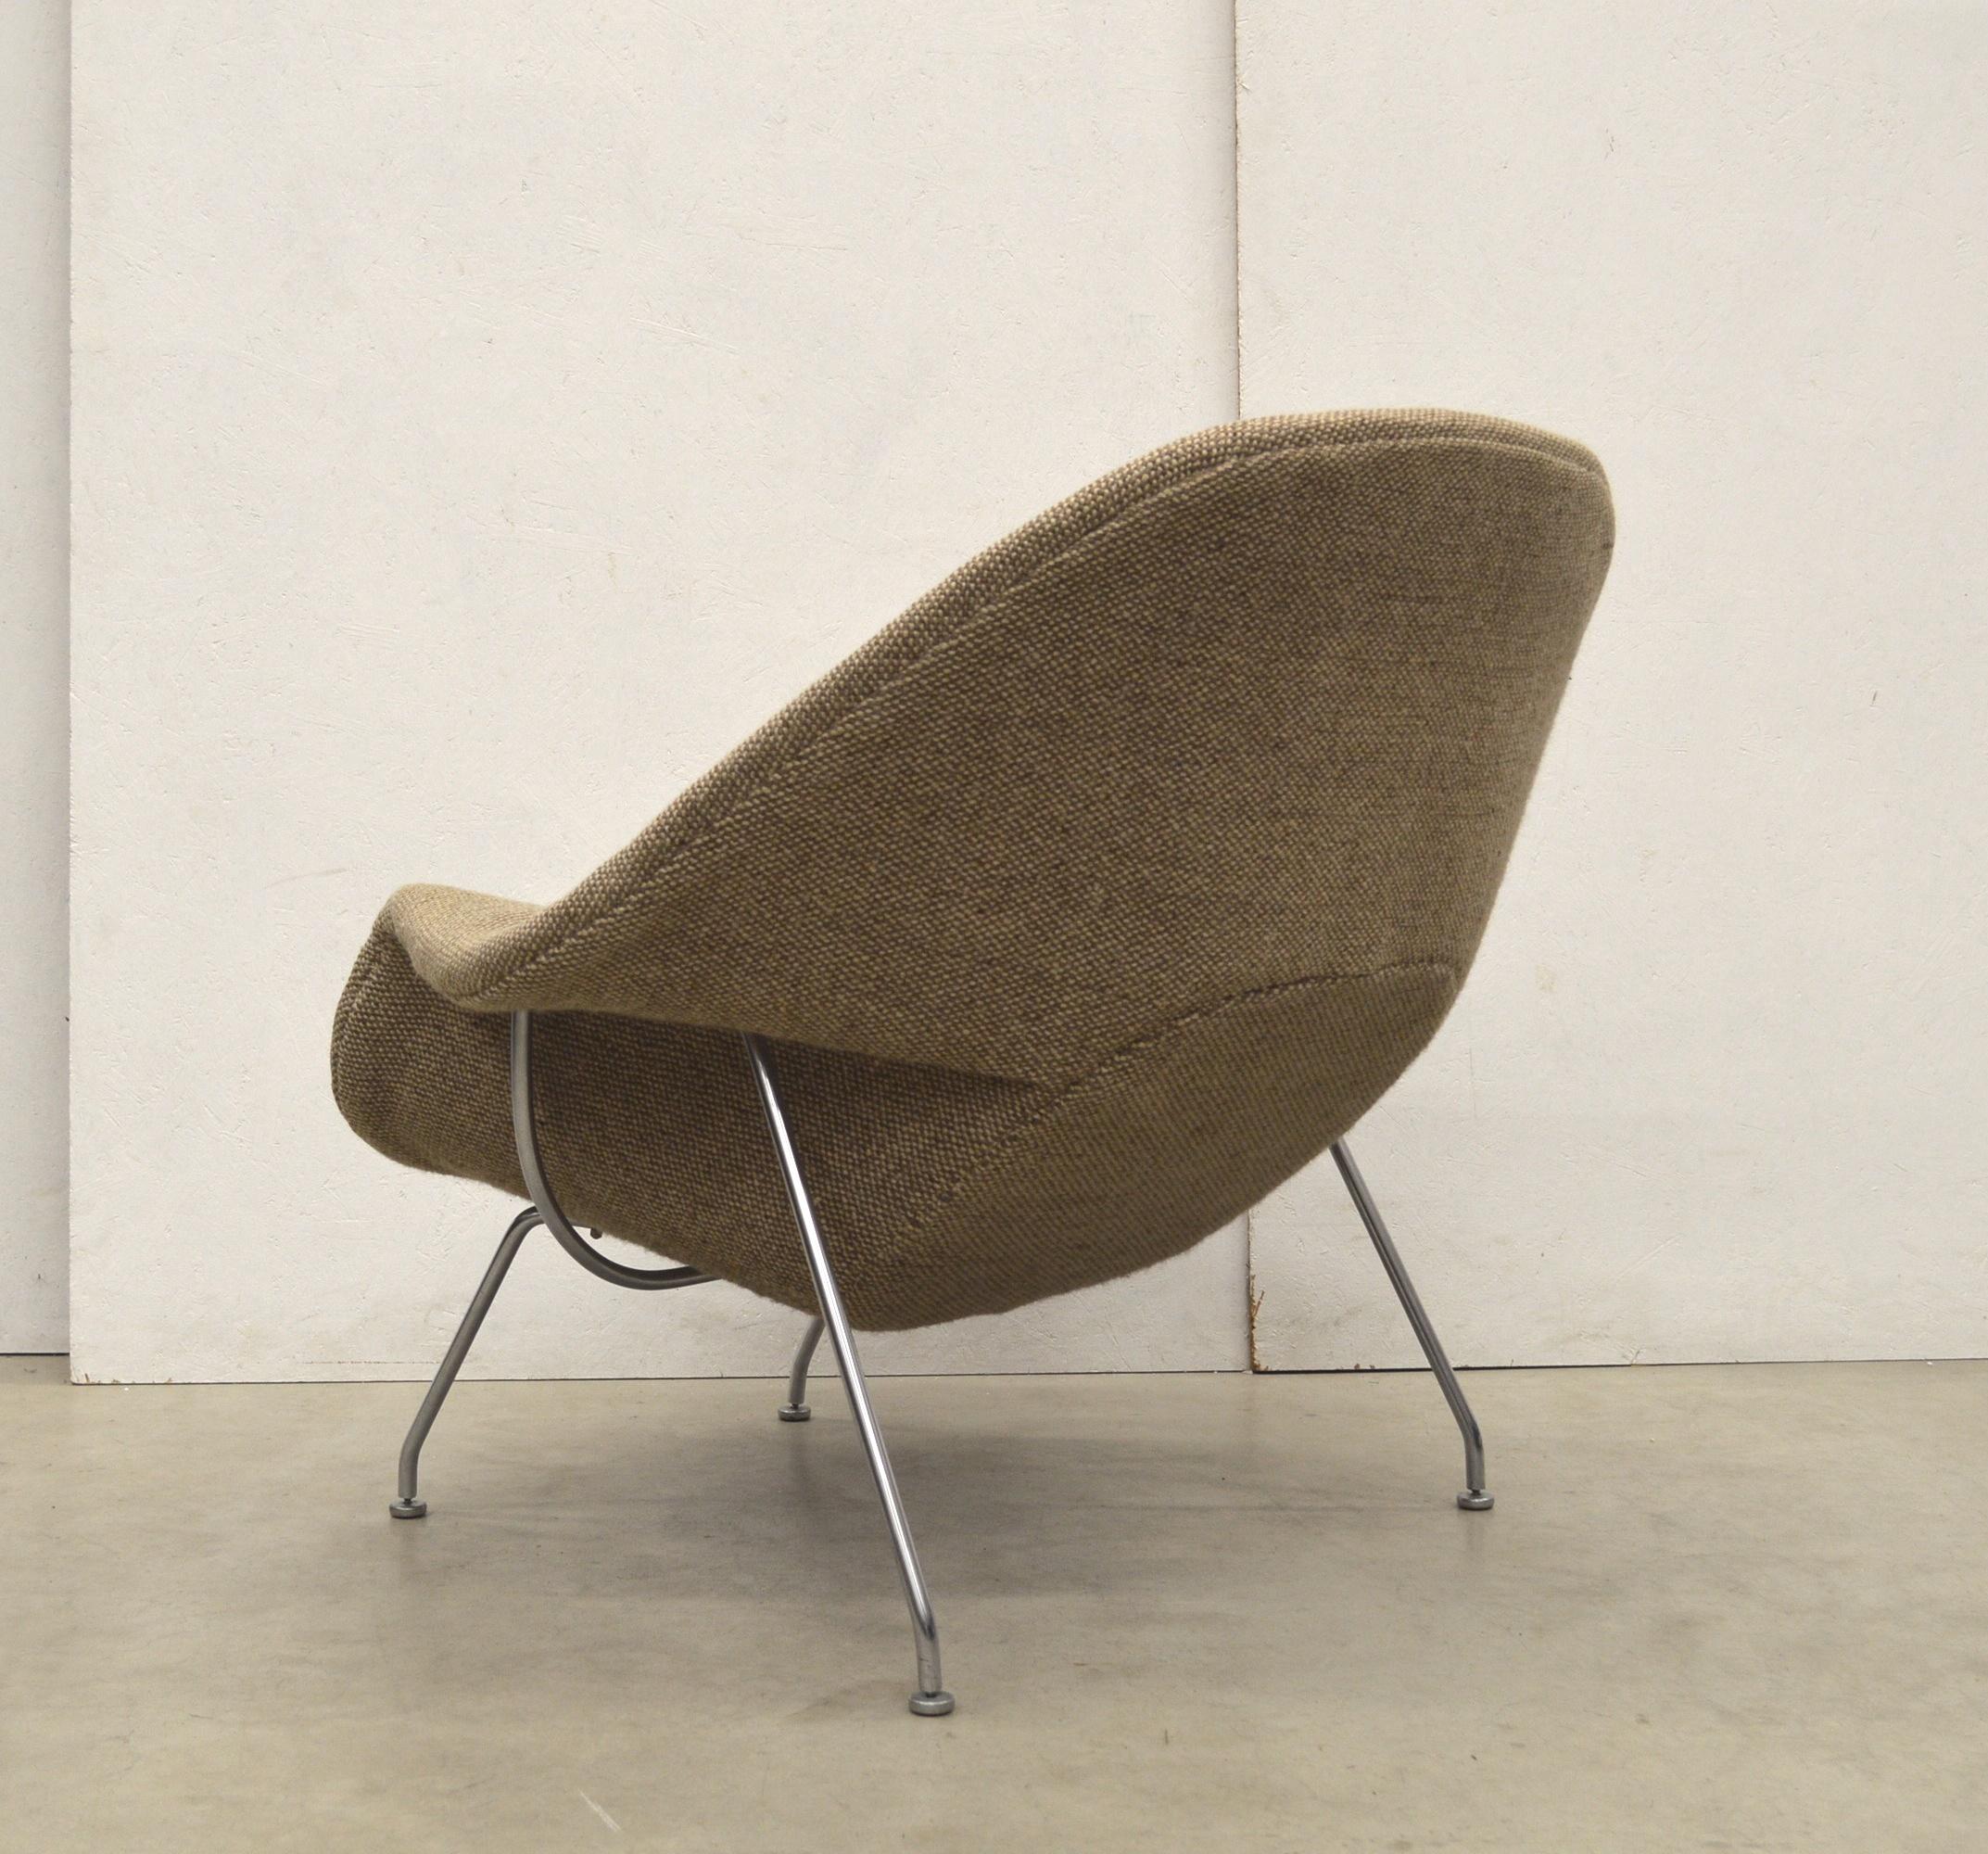 American Early Wool Womb Chair by Eero Saarinen for Knoll, 1960s For Sale